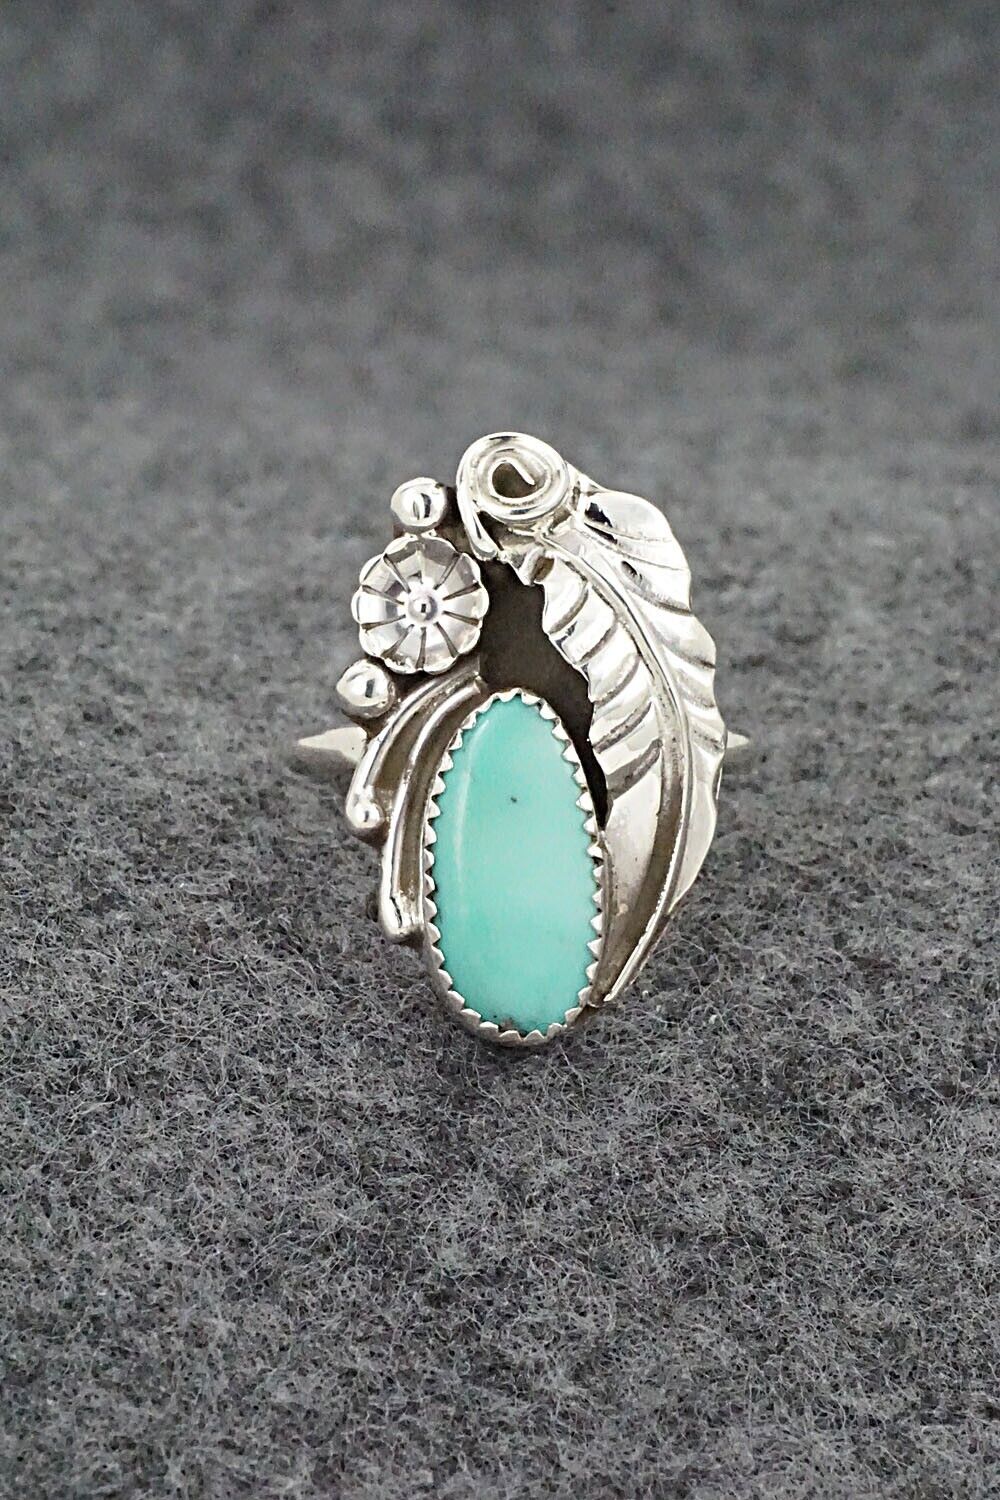 Turquoise & Sterling Silver Ring - Helena Martinez - Size 7.5